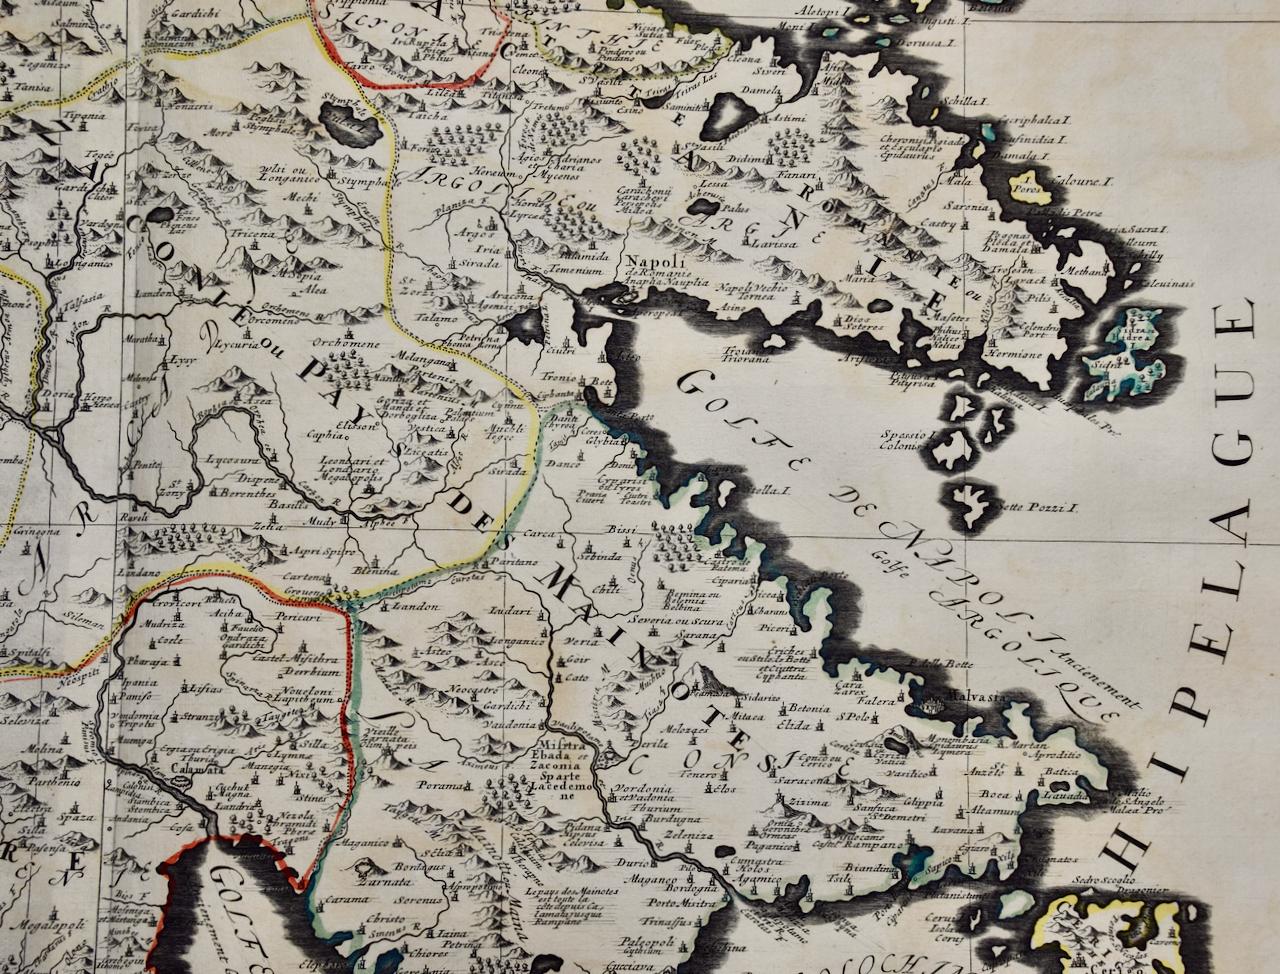 This large original hand-colored copperplate engraved map of southern Greece and the Pelopponese Peninsula entitled 